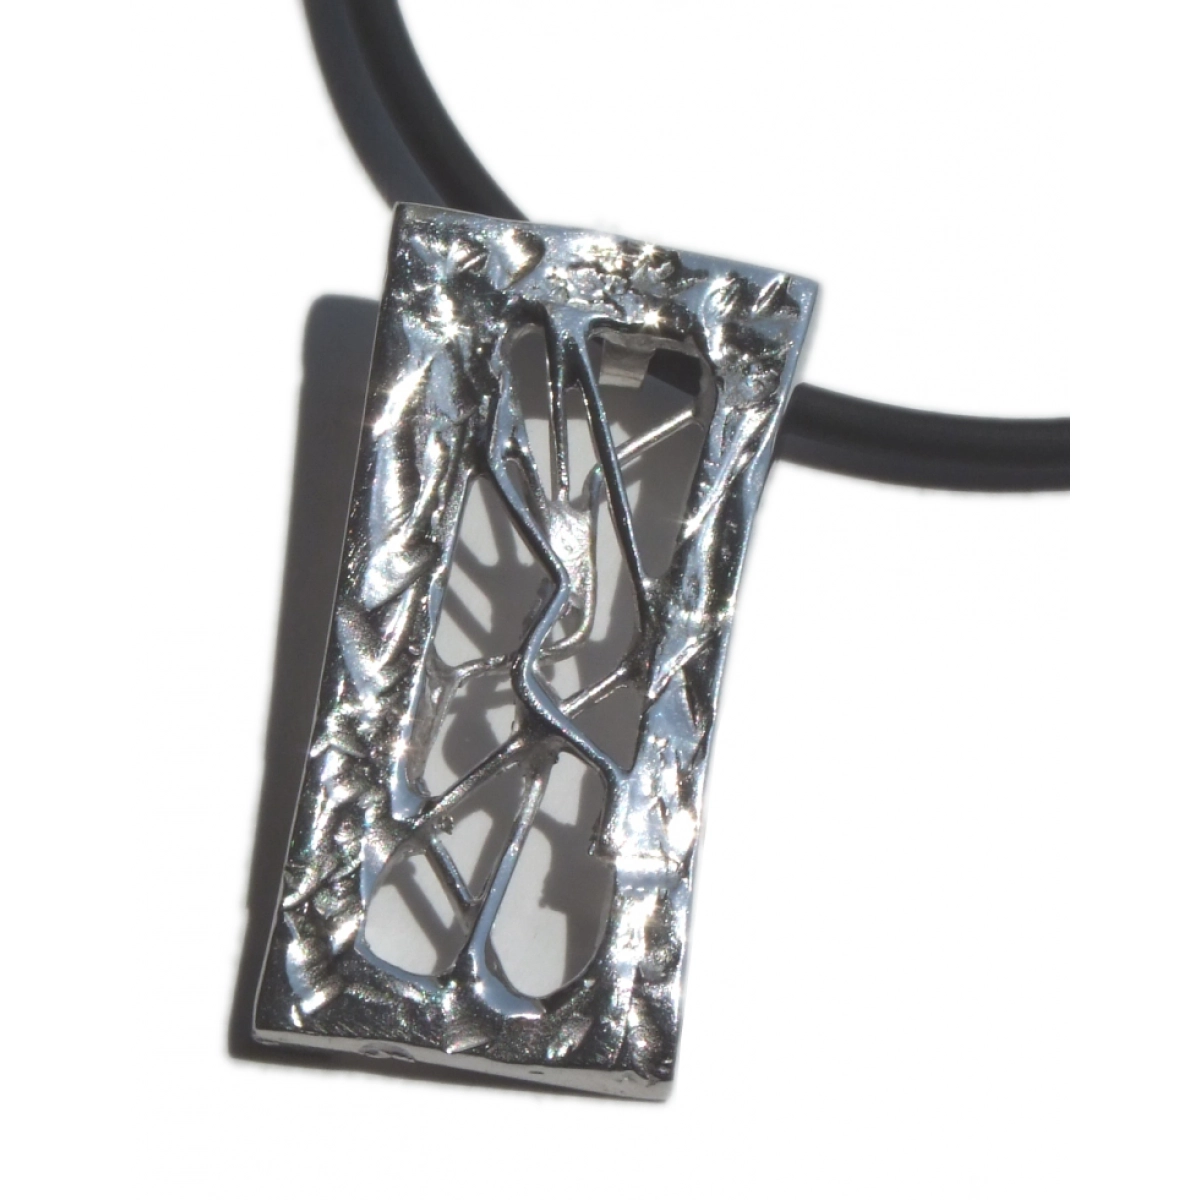 Pendant in silver, the slides collection. Dimensions: 5 X 2.2 cm FP C32-P Fili Plaza